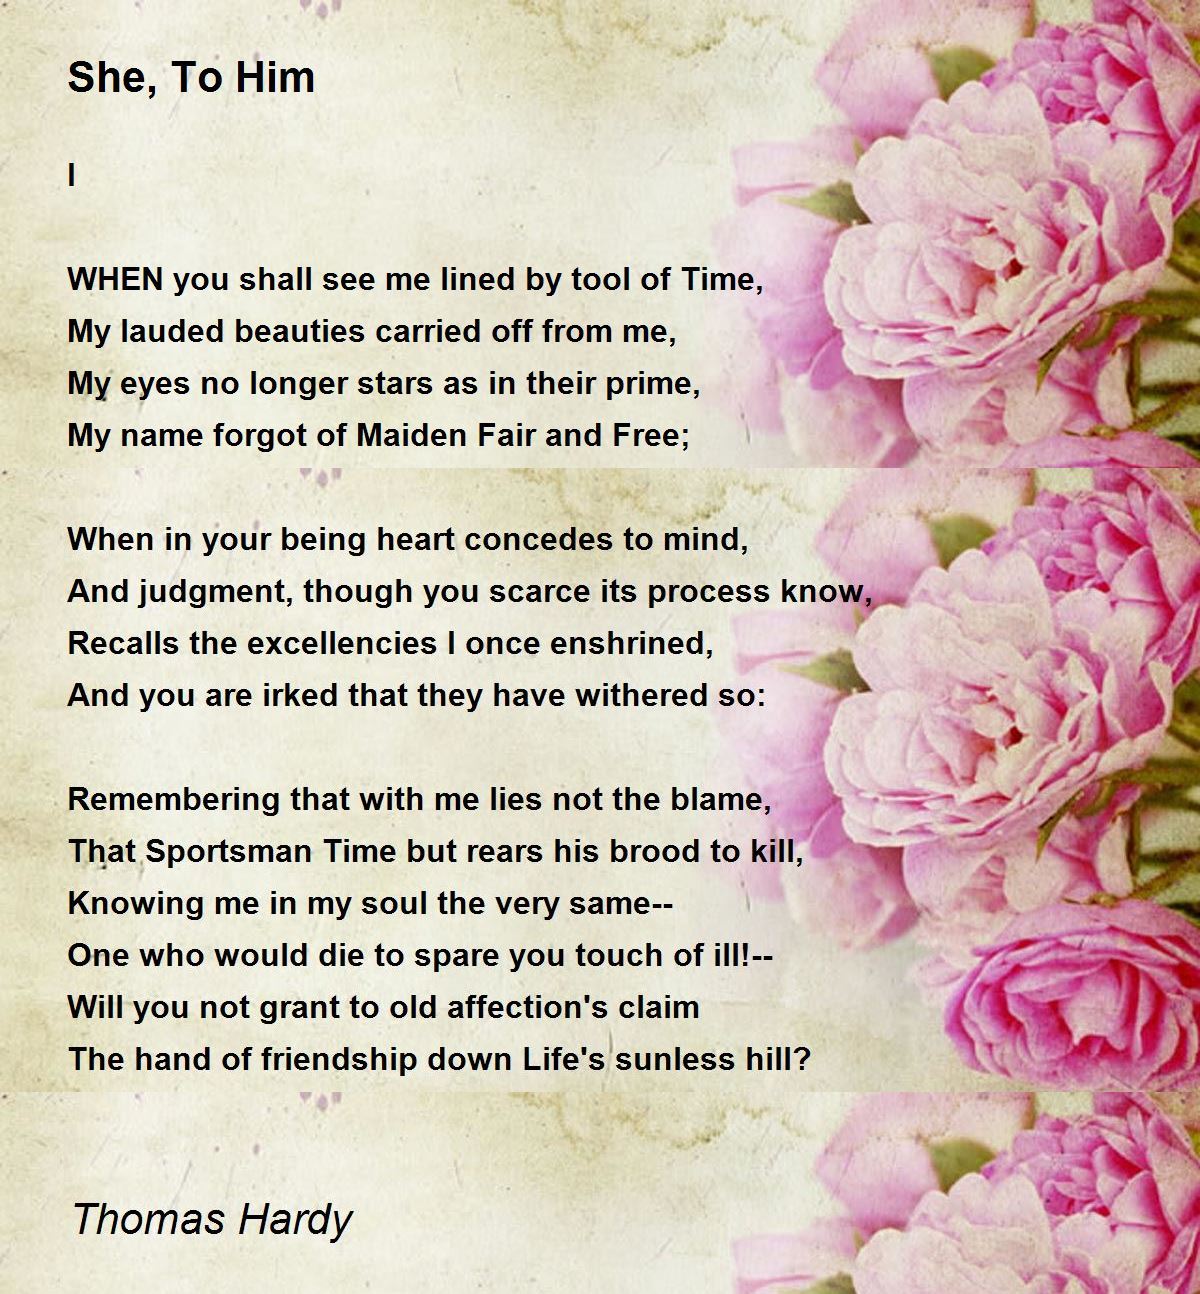 She, To Him - She, To Him Poem by Thomas Hardy.